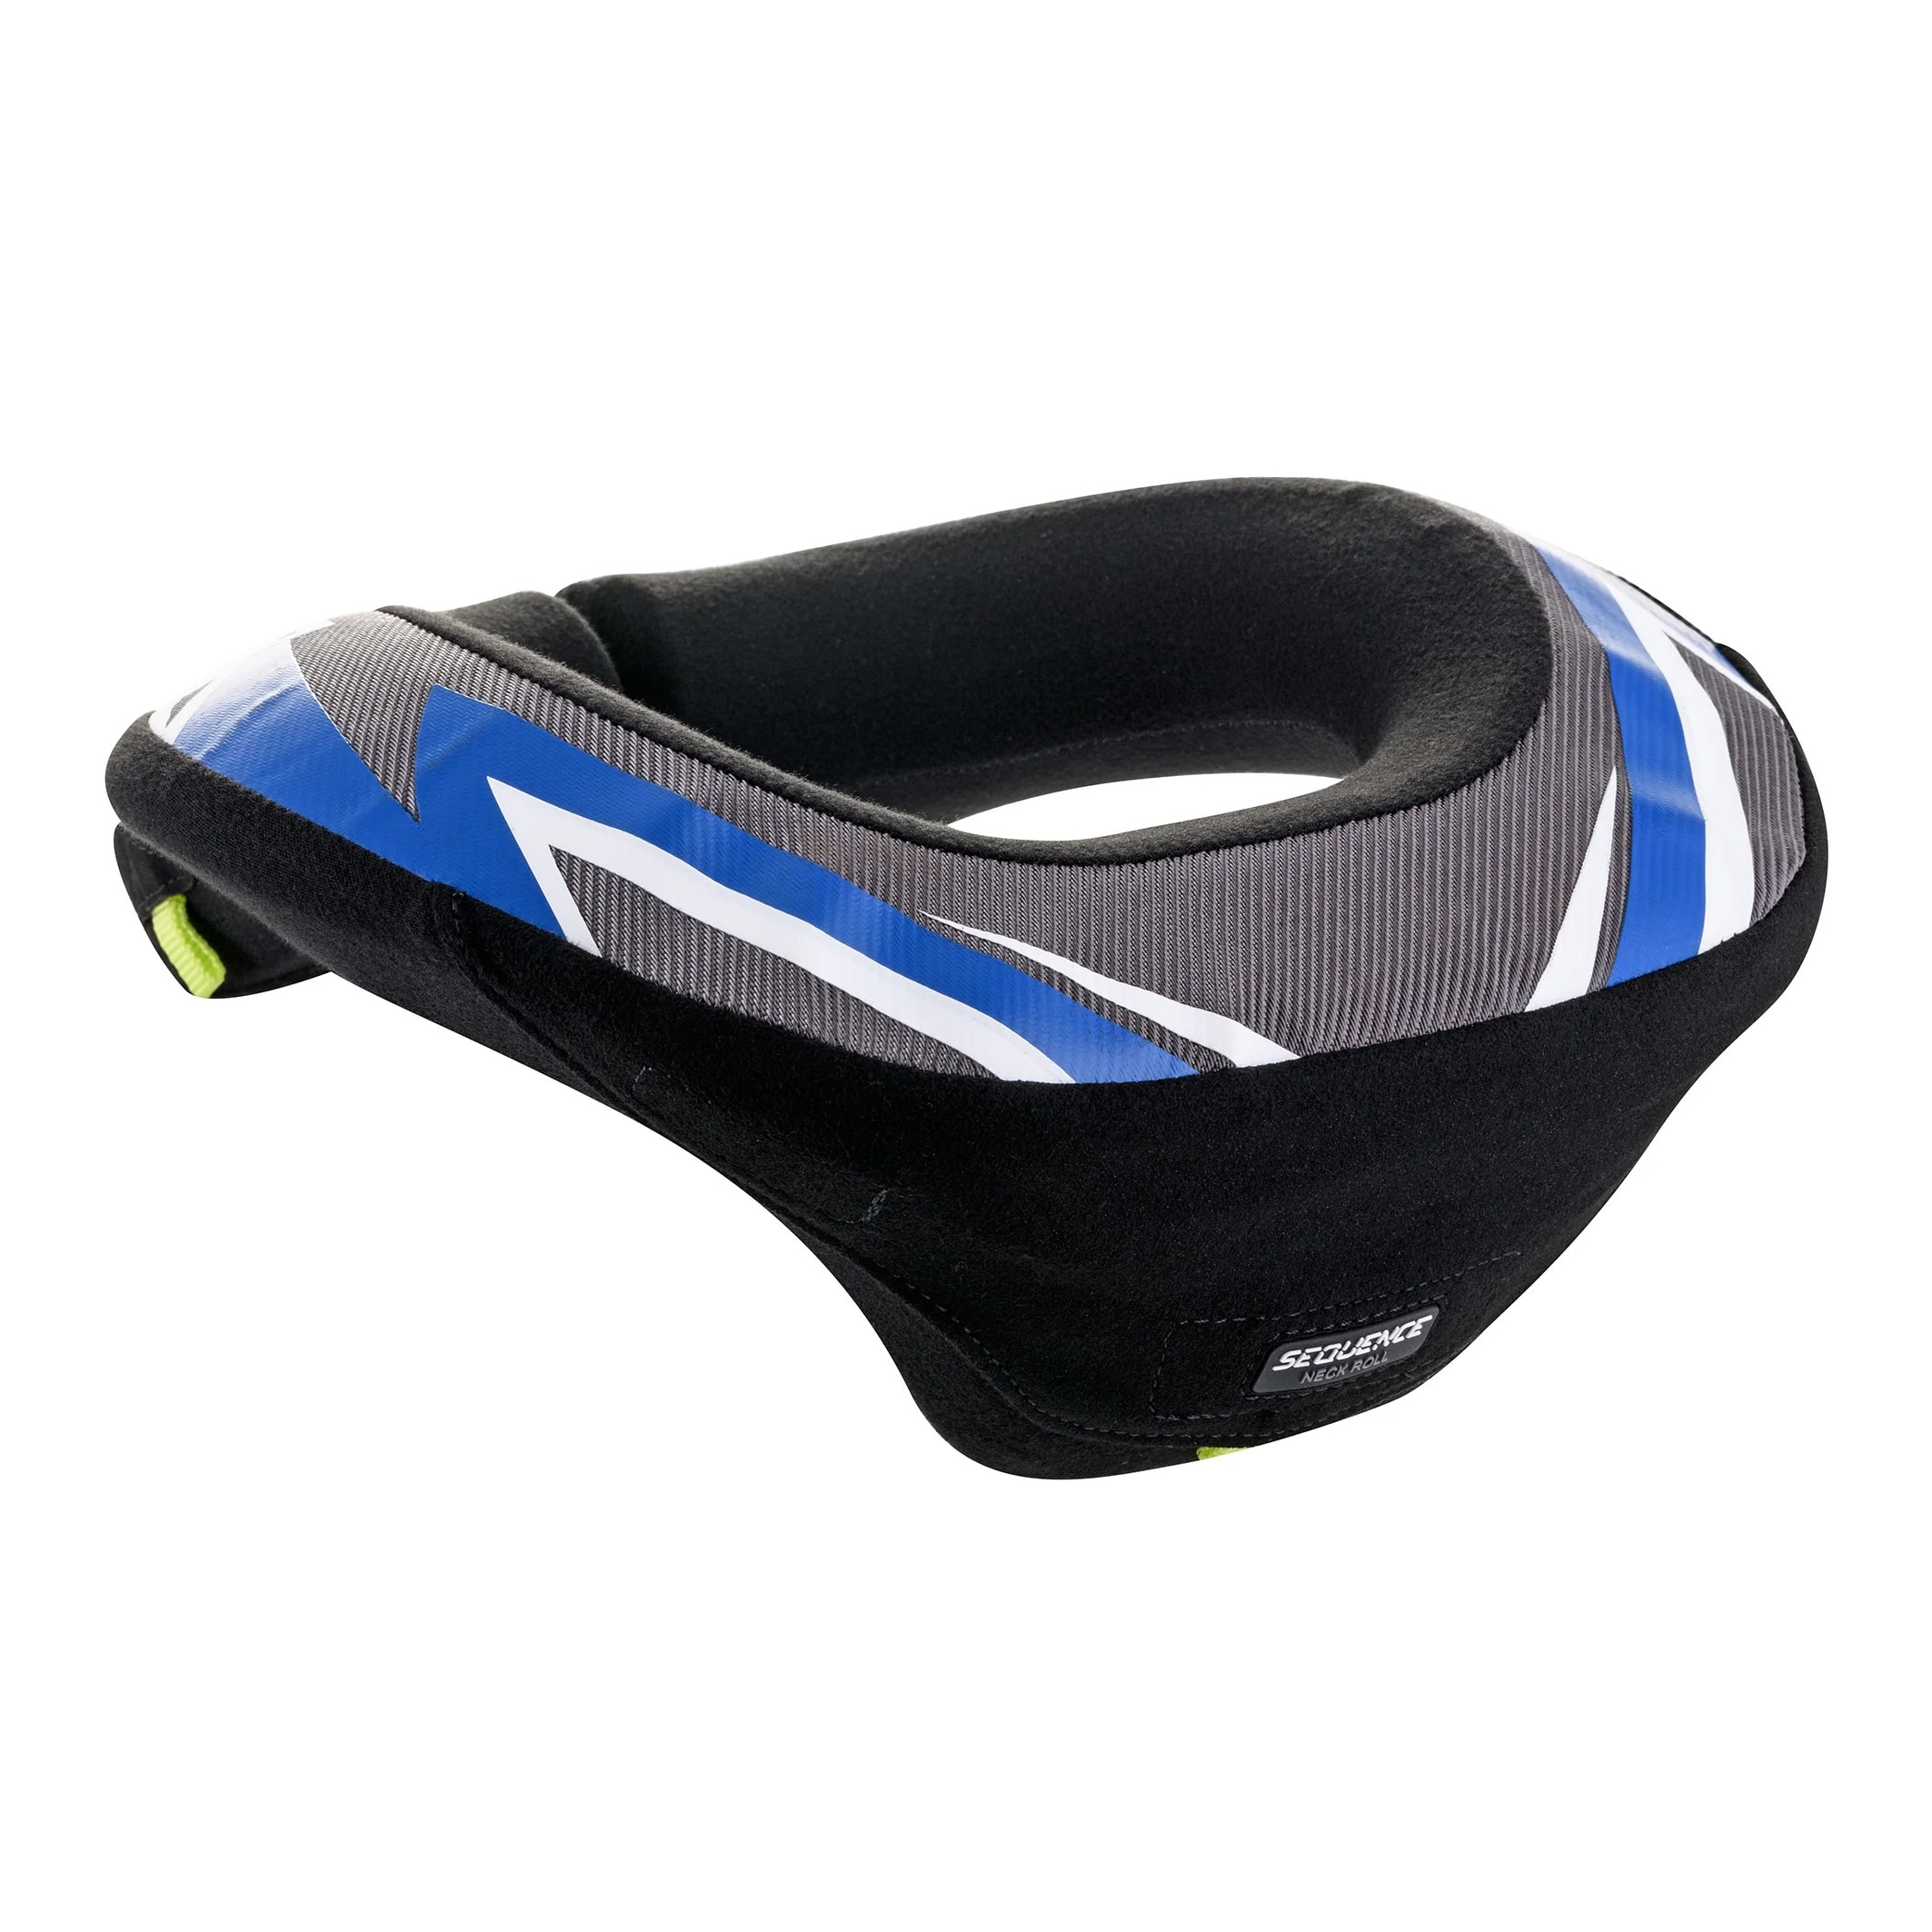 Neckprotection Sequence Youth Black/Blue